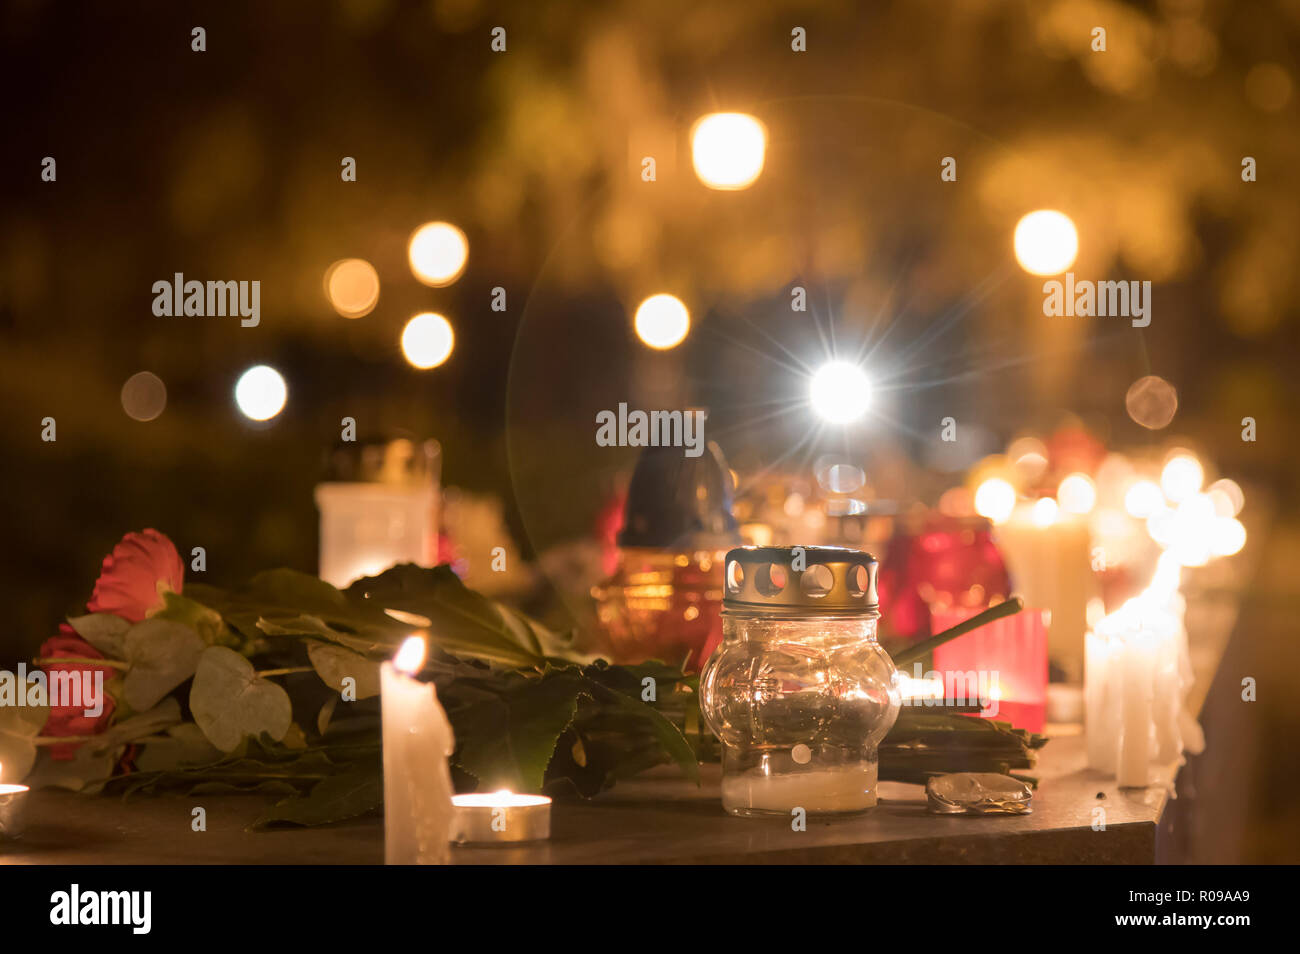 Budapest, Hungary. 1st Nov, 2018. Candles to commemorate lost relatives and loved ones are seen in Budapest, Hungary, on Nov. 1, 2018. The All Saints' Day in Hungary on Nov. 1 saw many families visit the cemeteries to pay respect for their dead family members and friends. Credit: Attila Volgyi/Xinhua/Alamy Live News Stock Photo